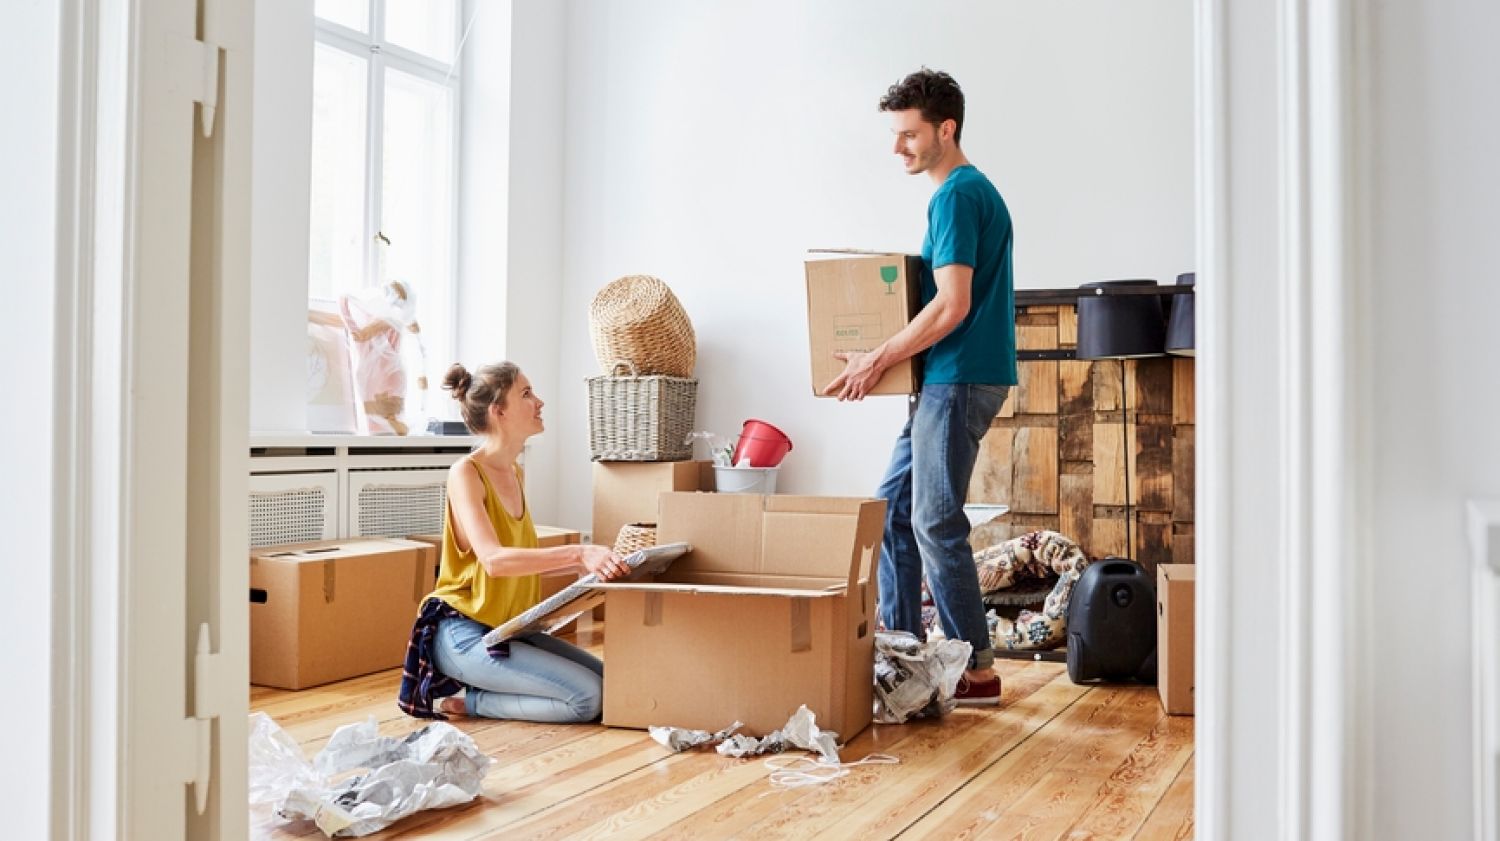 5 Top Items that Get Damaged While Moving (and How to Pack Them)